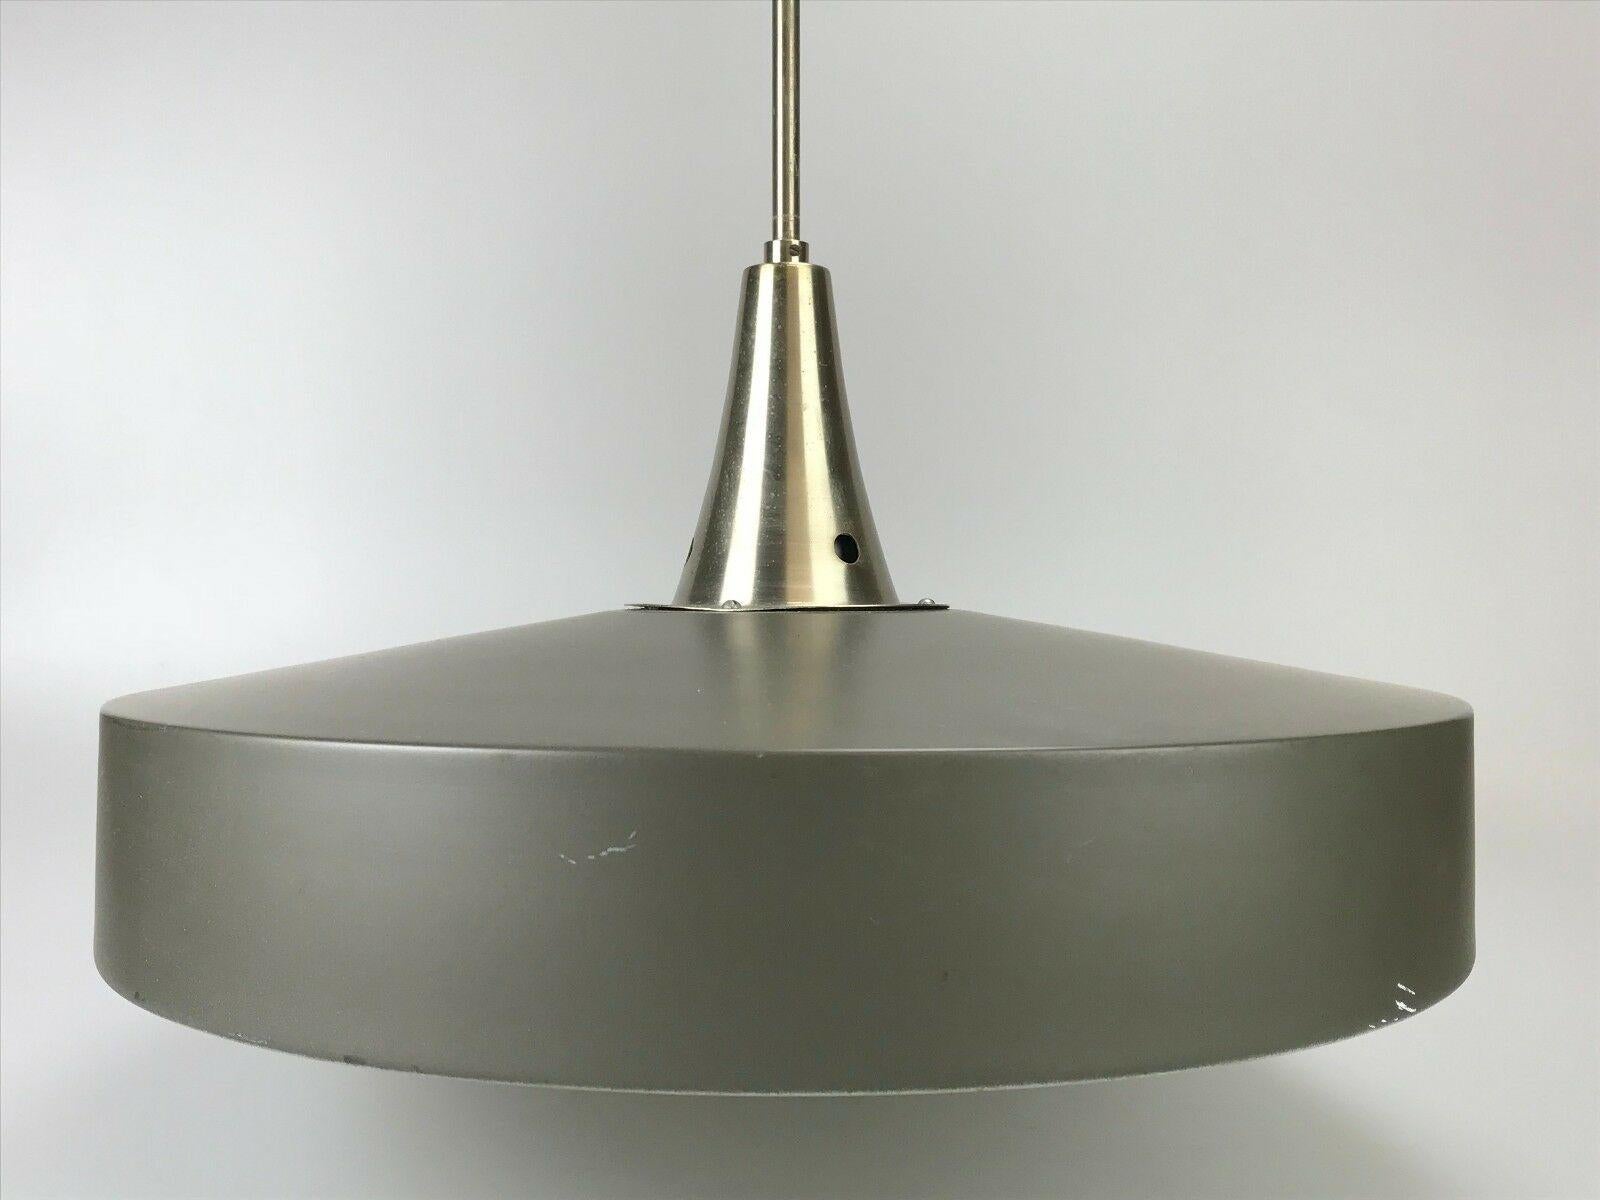 70s lamp light ceiling lamp metal hanging lamp space age design

Object: ceiling lamp

Manufacturer:

Condition: good

Age: around 1960-1970

Dimensions:

Diameter = 45.5cm
Hanging height = 79cm

Other notes:

The pictures serve as